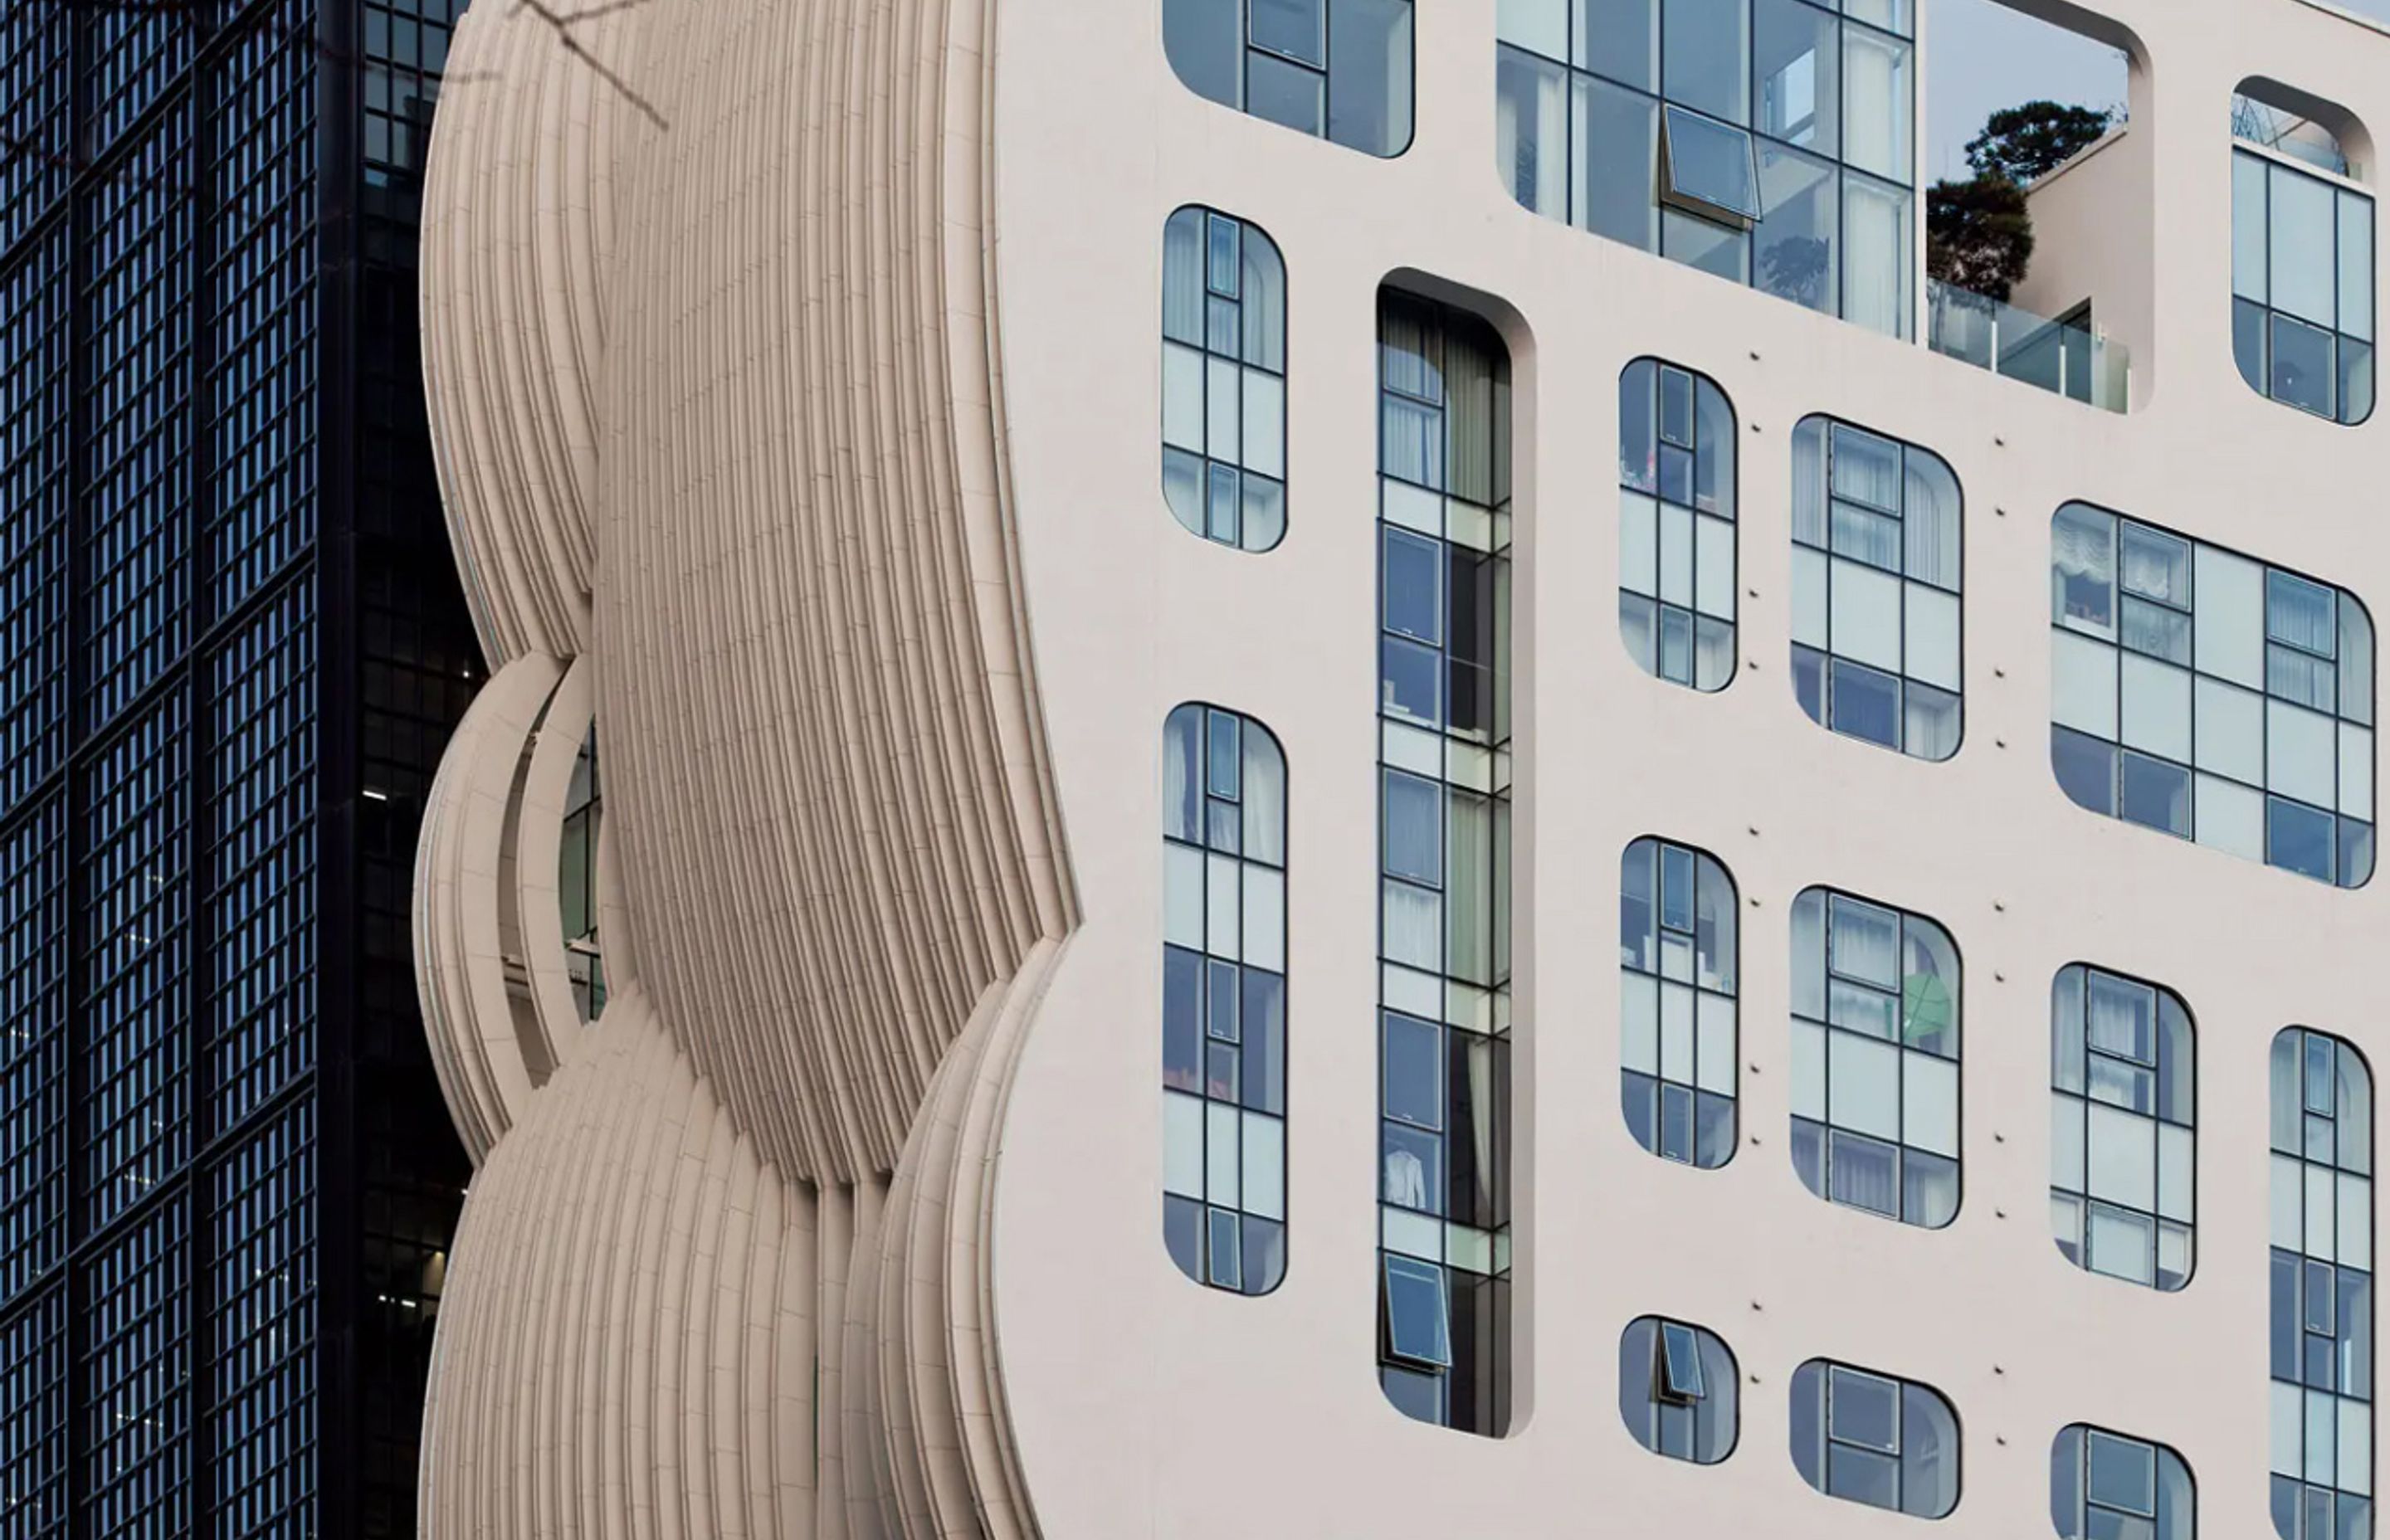 Neolith Arctic White façade. Sangbong Lee building in Seoul (South Korea), by UnSangDong Architects.